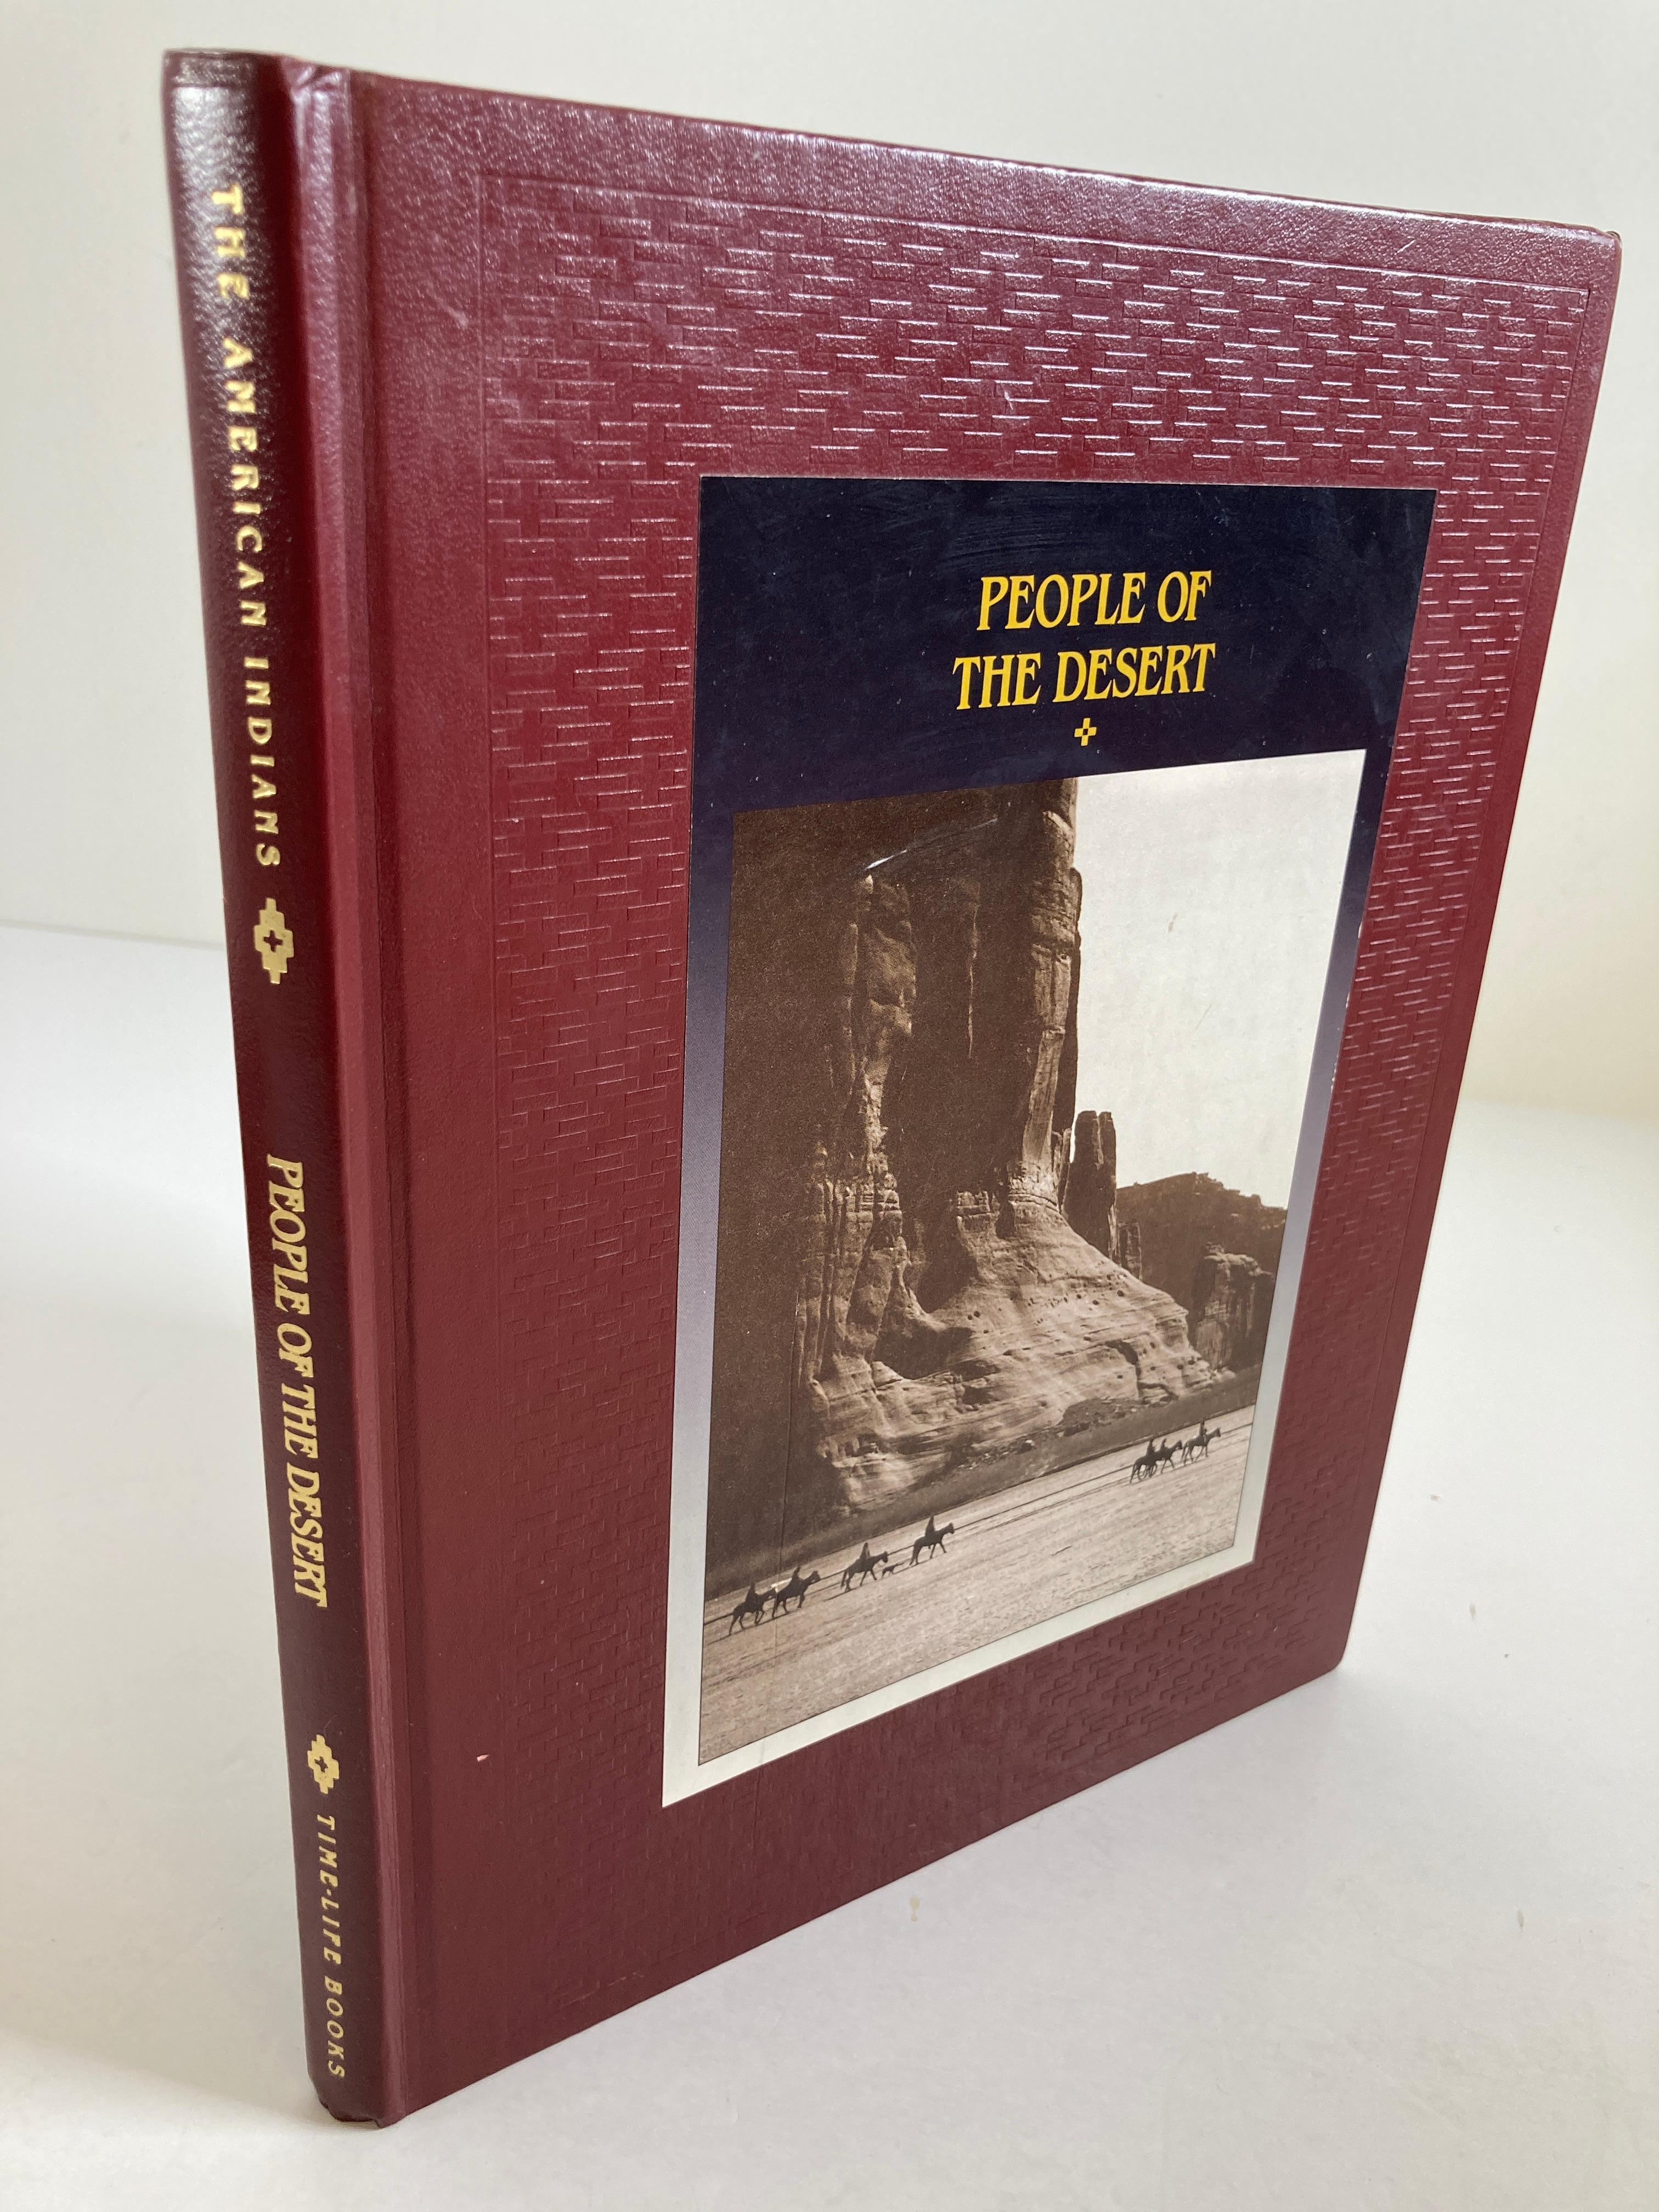 The American Indians, The Way of the Warriors and People of the Desert Books 8